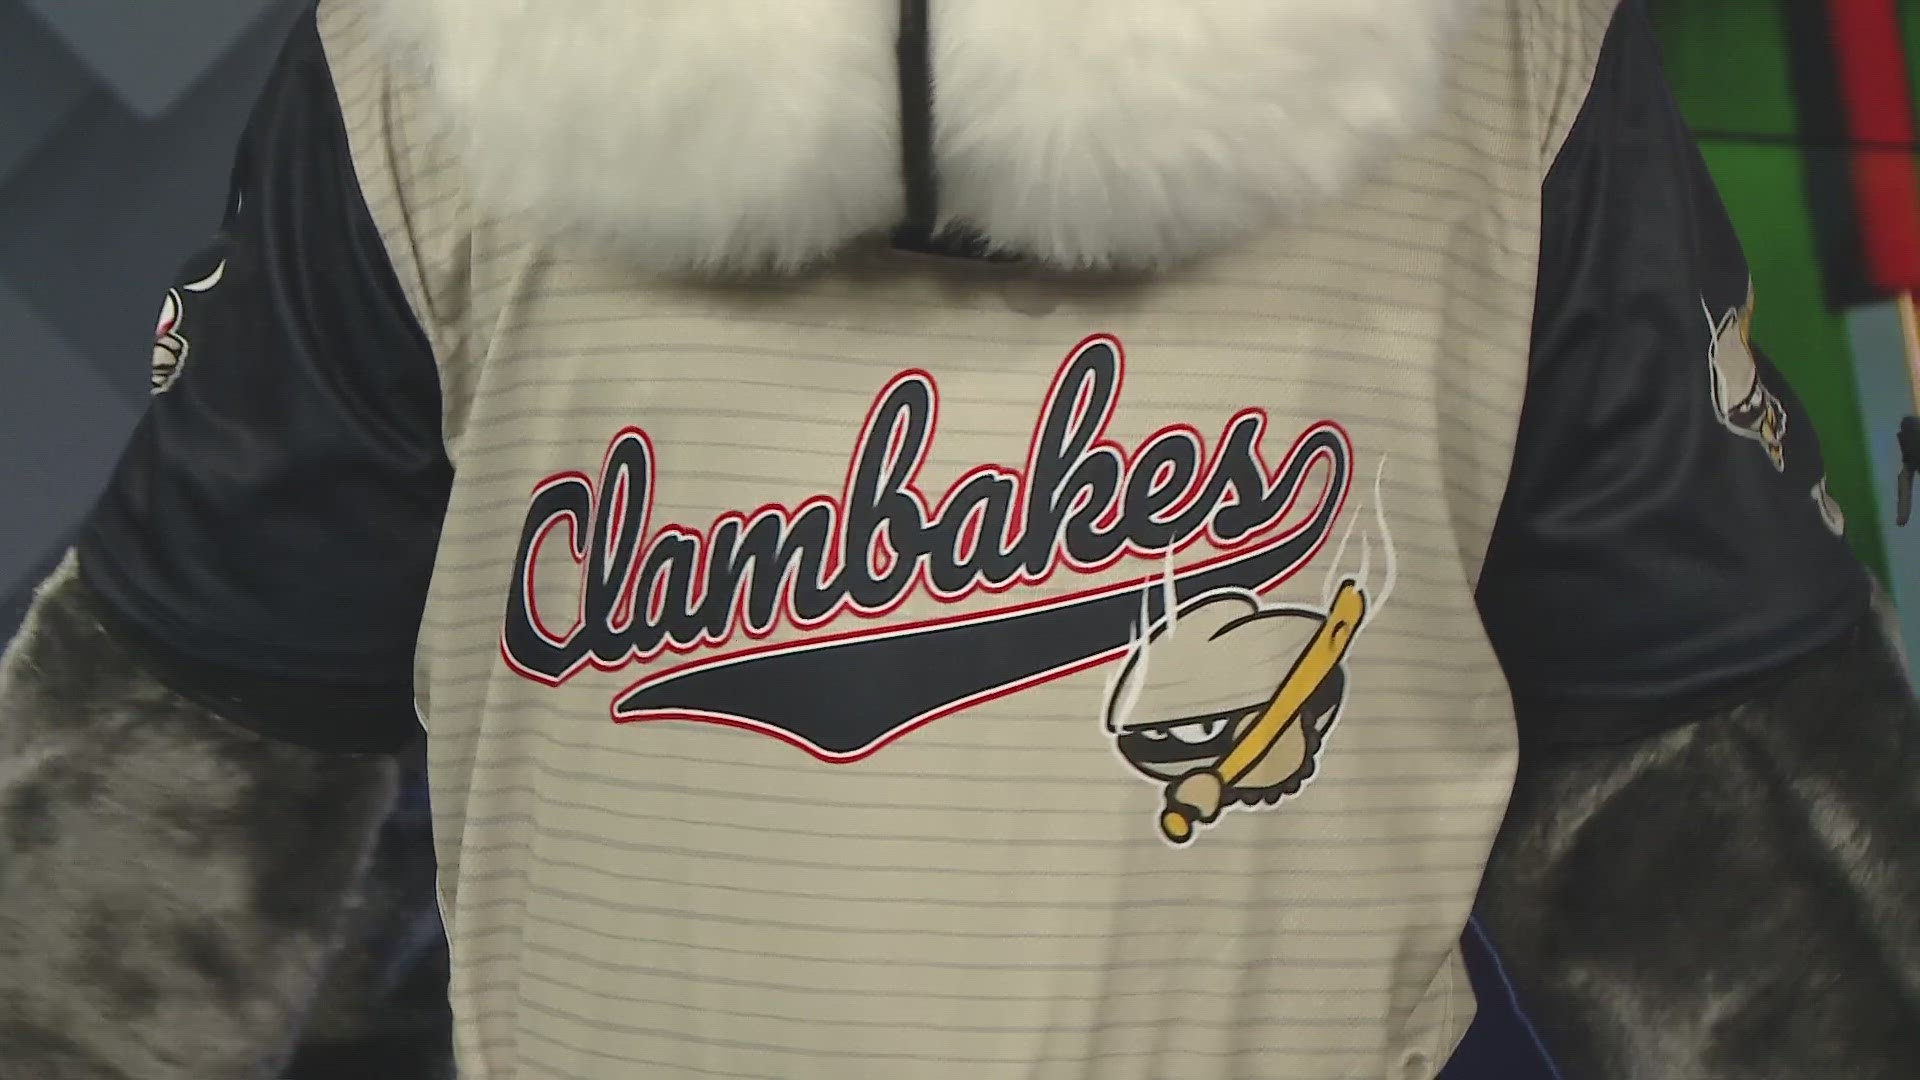 On Friday, August 25, the Sea Dogs will take the field as the Maine Clambakes.